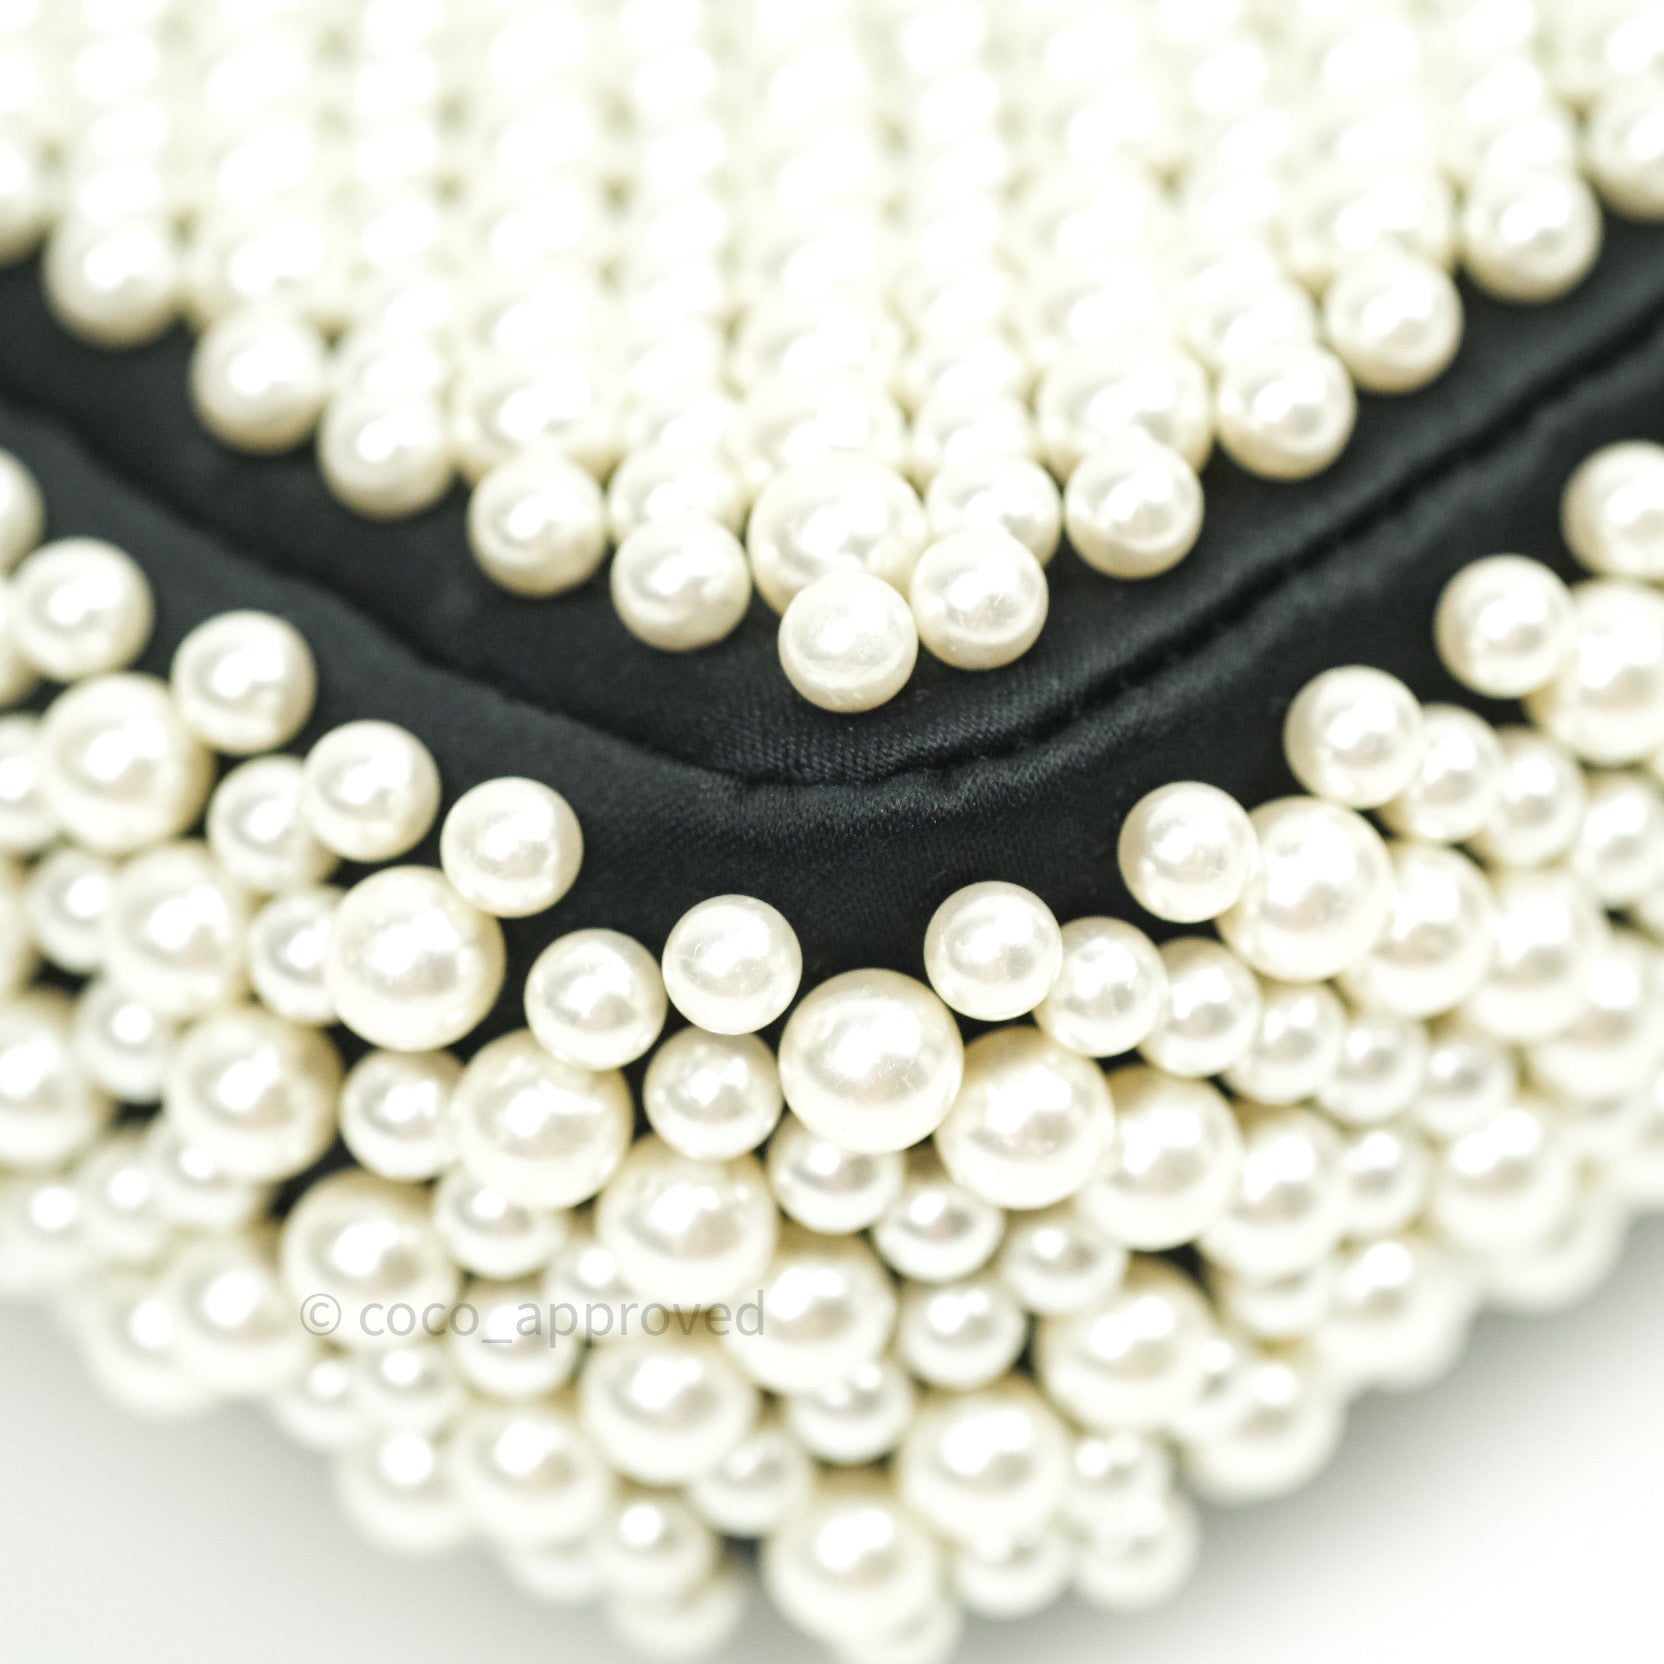 CHANEL 19S Pearl Mini Flap Bag - Timeless Luxuries